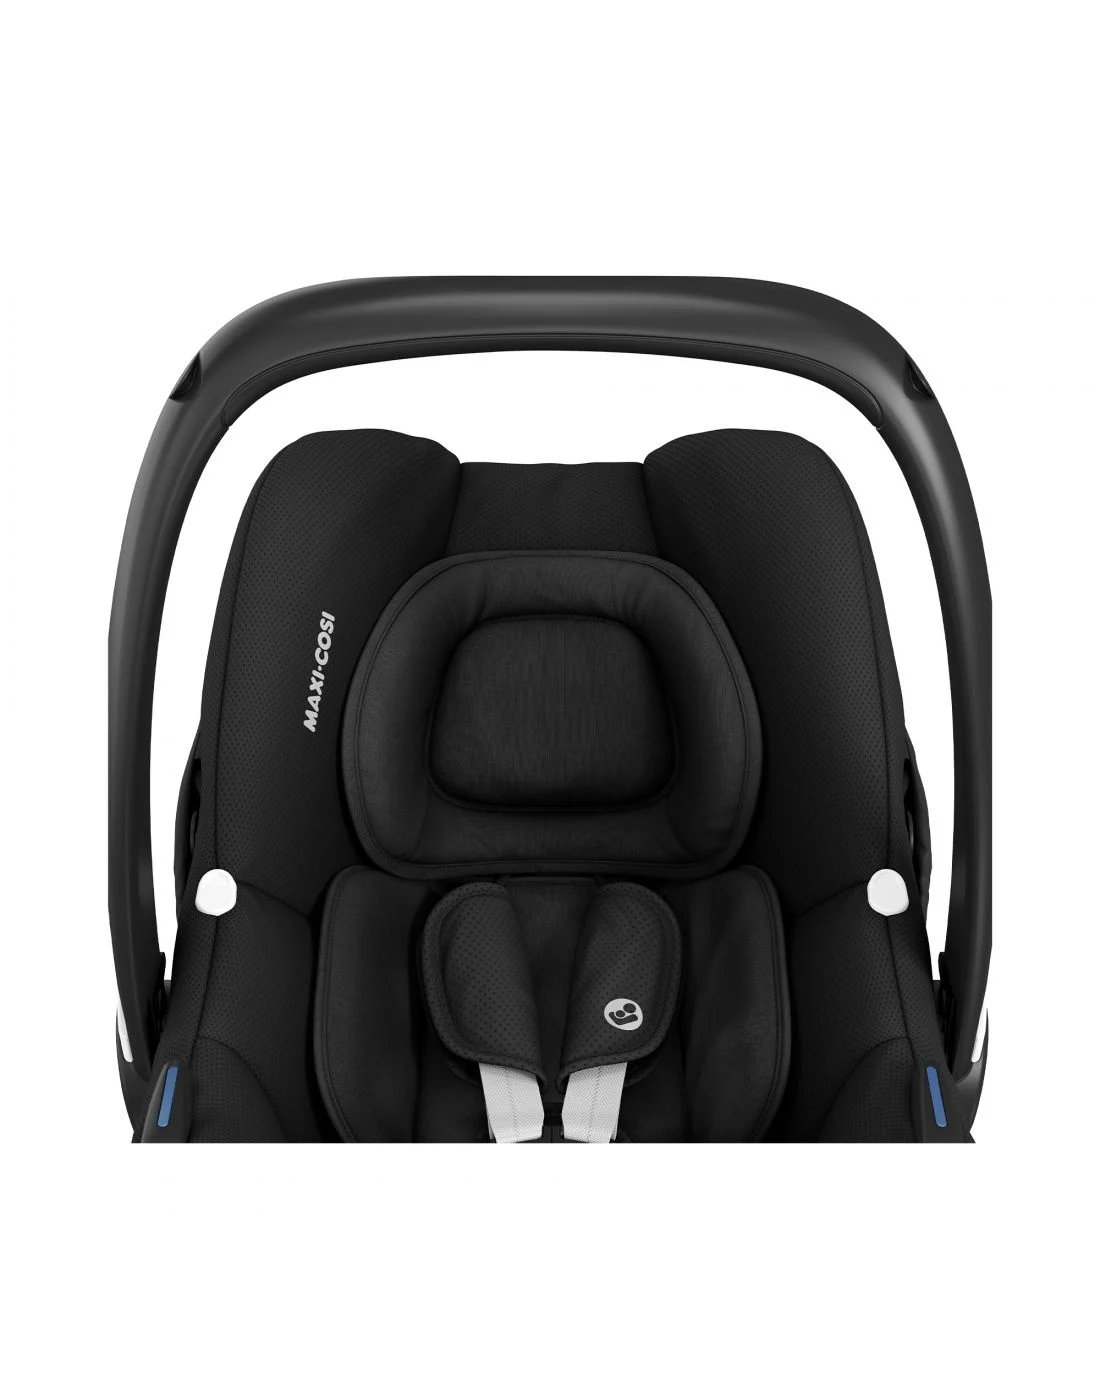 Mamas & Papas Ocarro - Everest With Gift Maxi Cosi Kids CabrioFix i-Size Essential Black Carseat